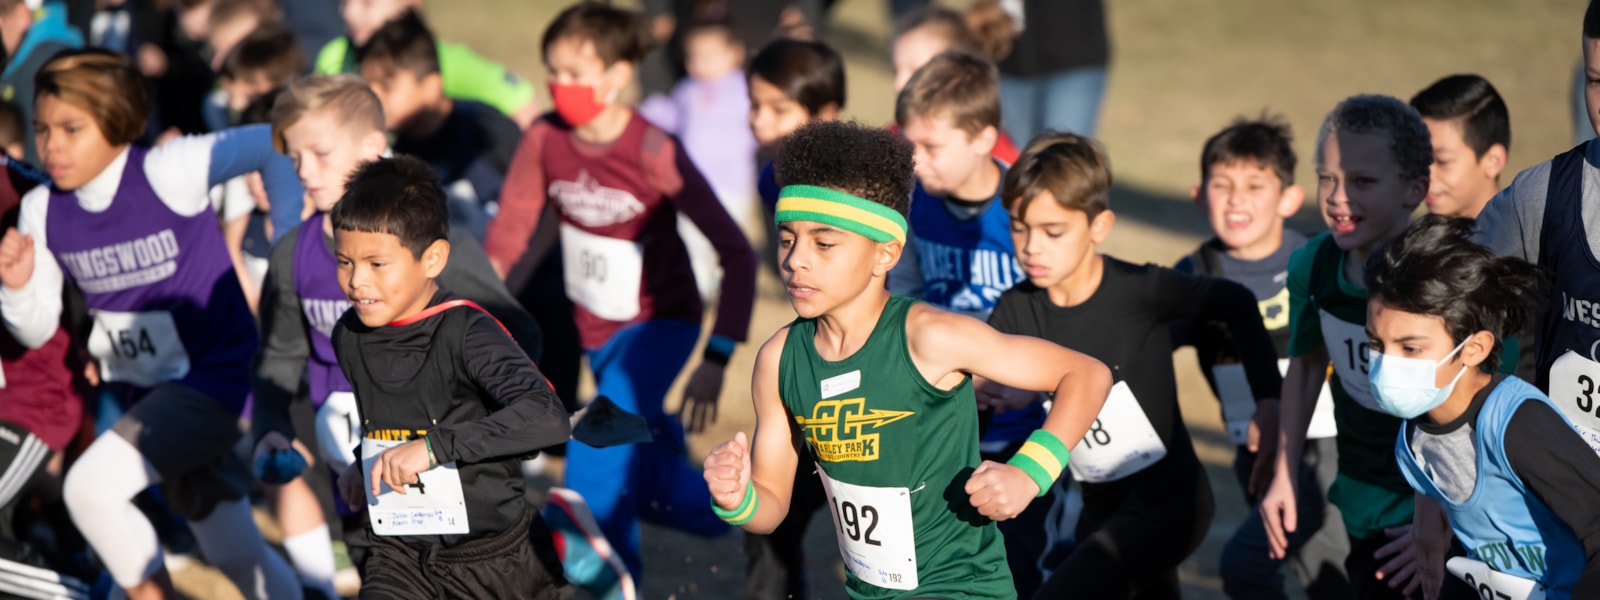 Student running in cross country race.